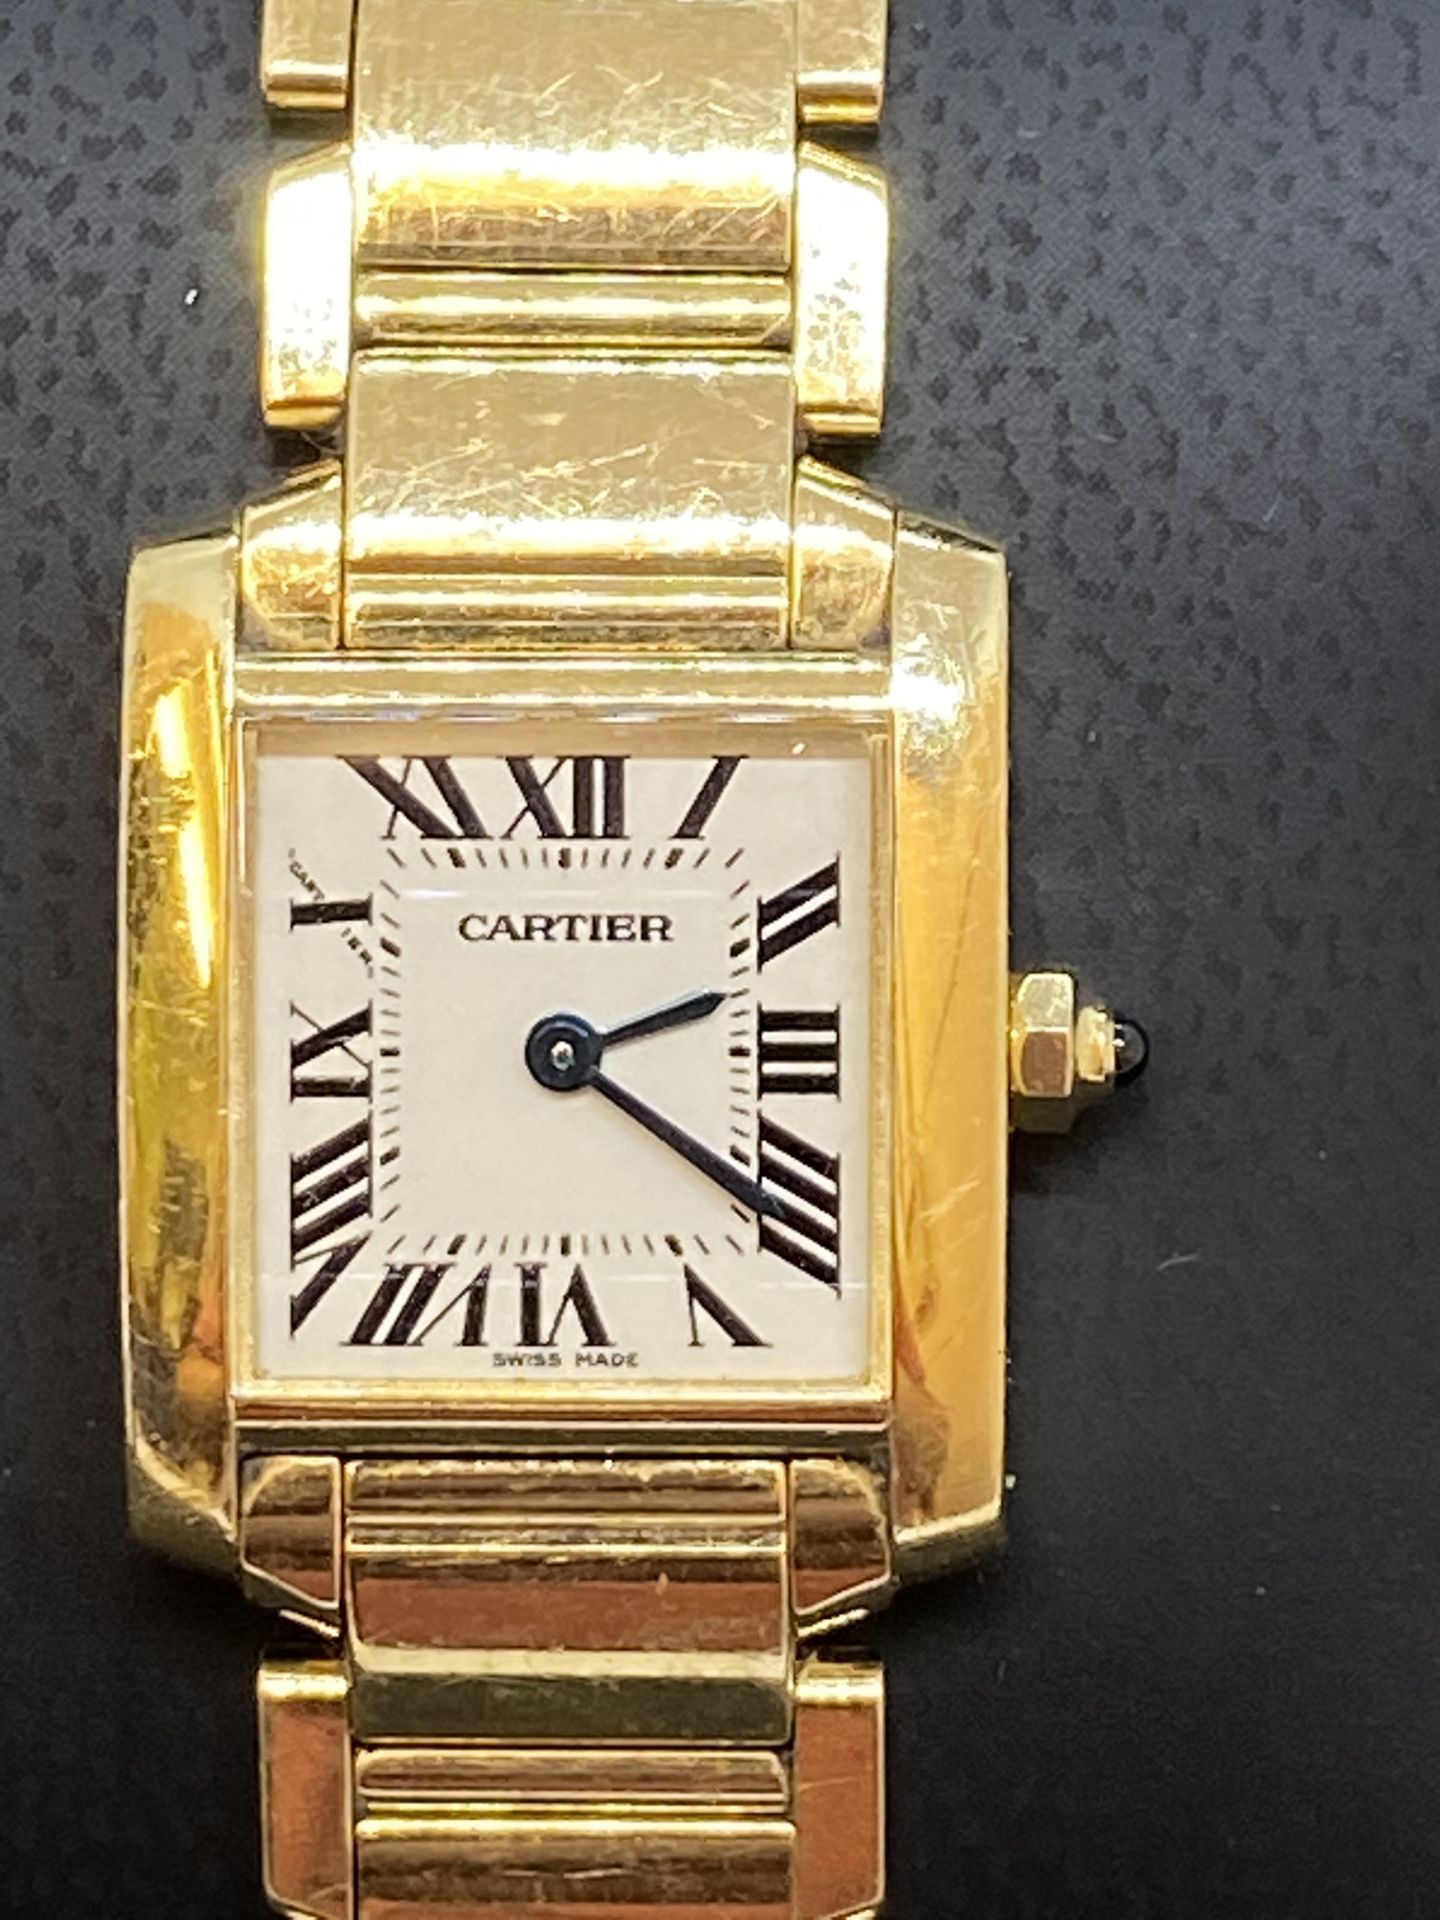 18ct GOLD CARTIER TANK FRANCAISE LADIES WATCH 2385 - Image 3 of 9